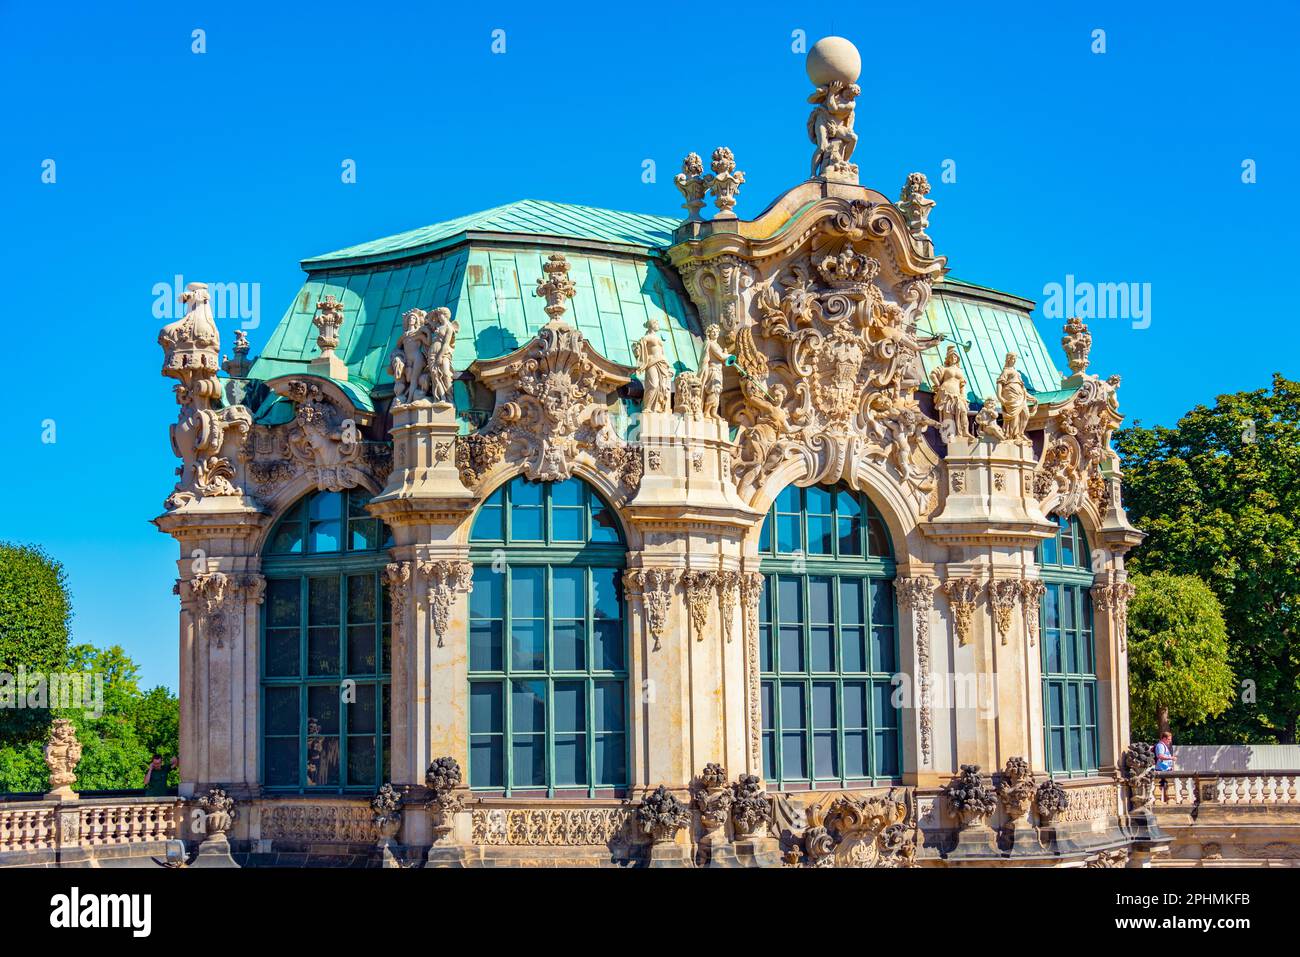 Ornaments and decoration of Zwinger palace in Dresden, Germany. Stock Photo